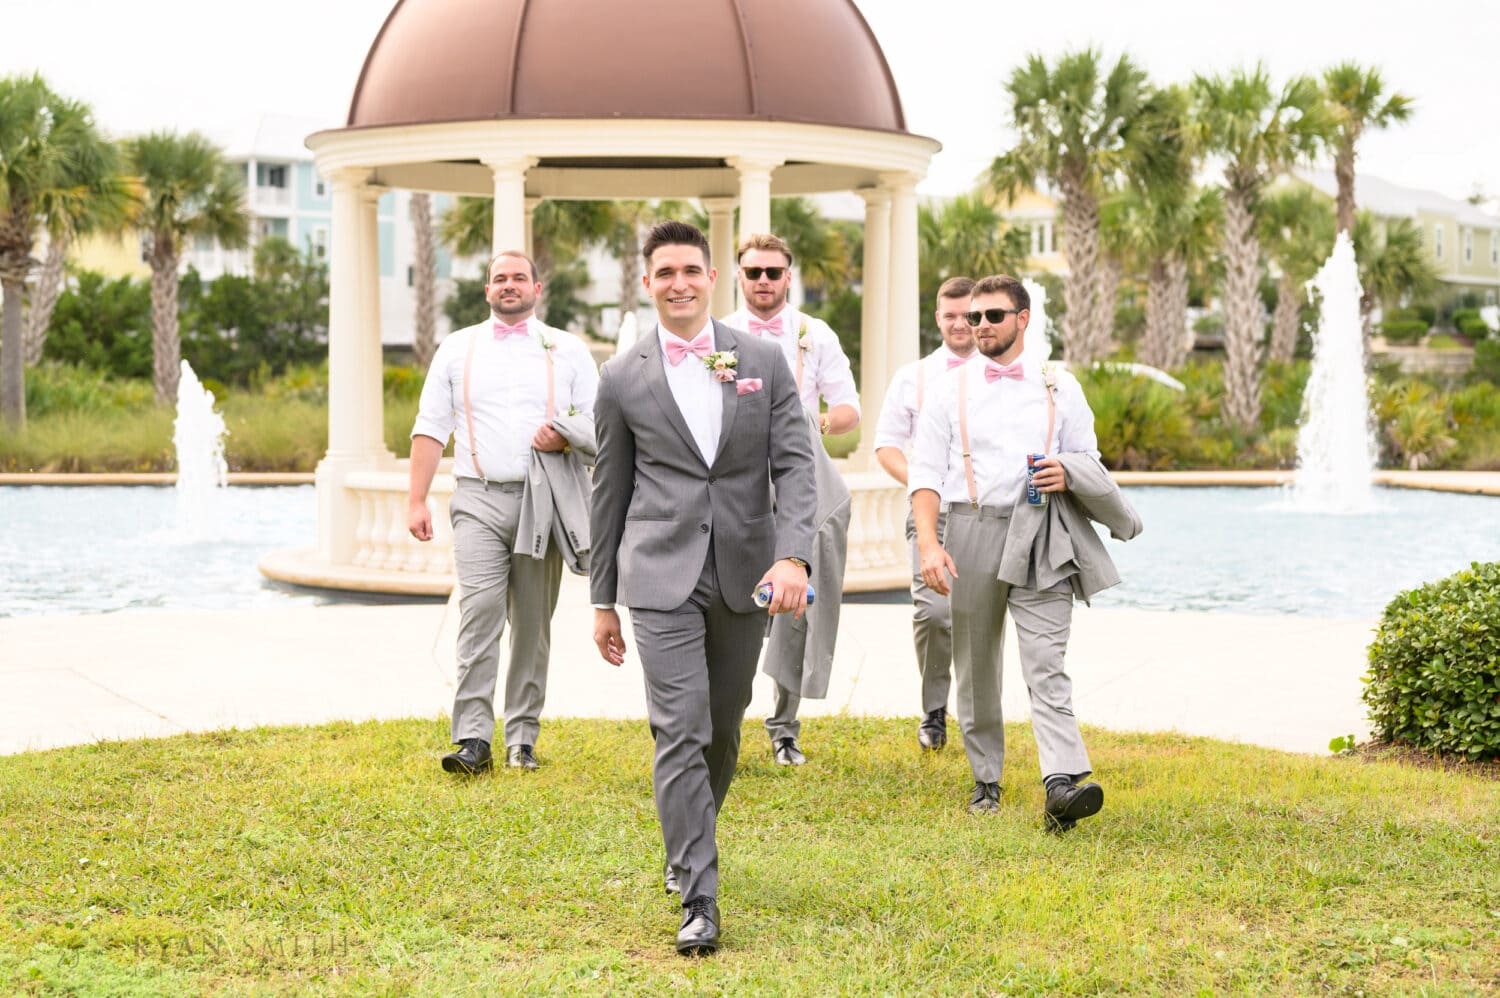 Groomsmen looking cool walking from the gazebo - 21 Main Events at North Beach